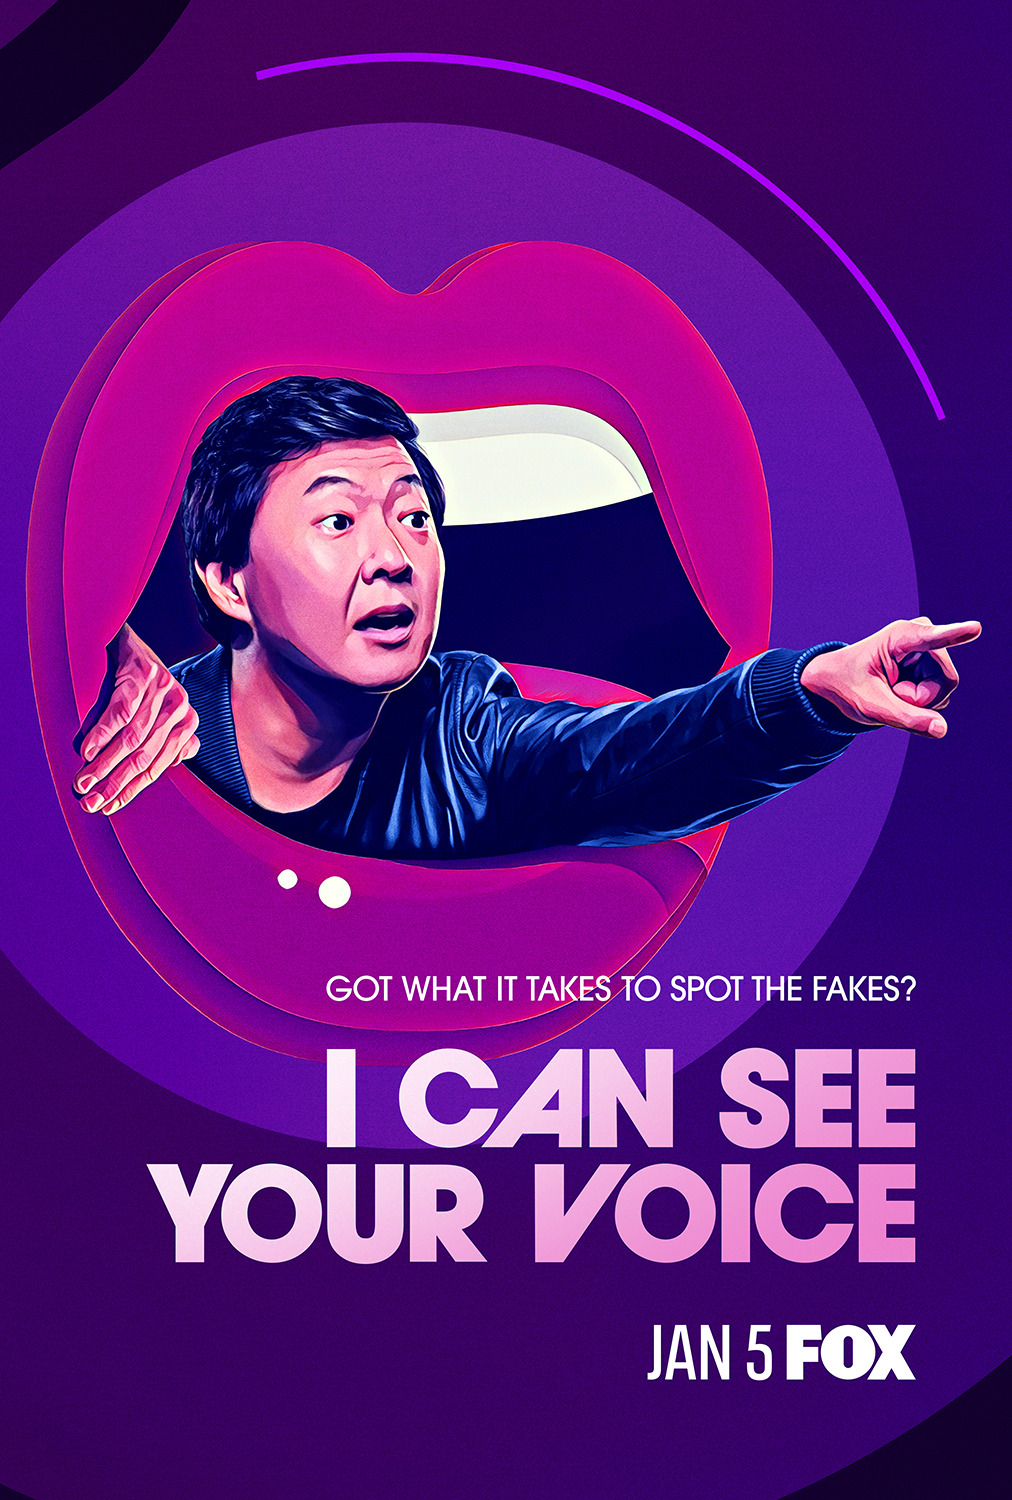 The Voices Movie Poster (#6 of 10) - IMP Awards